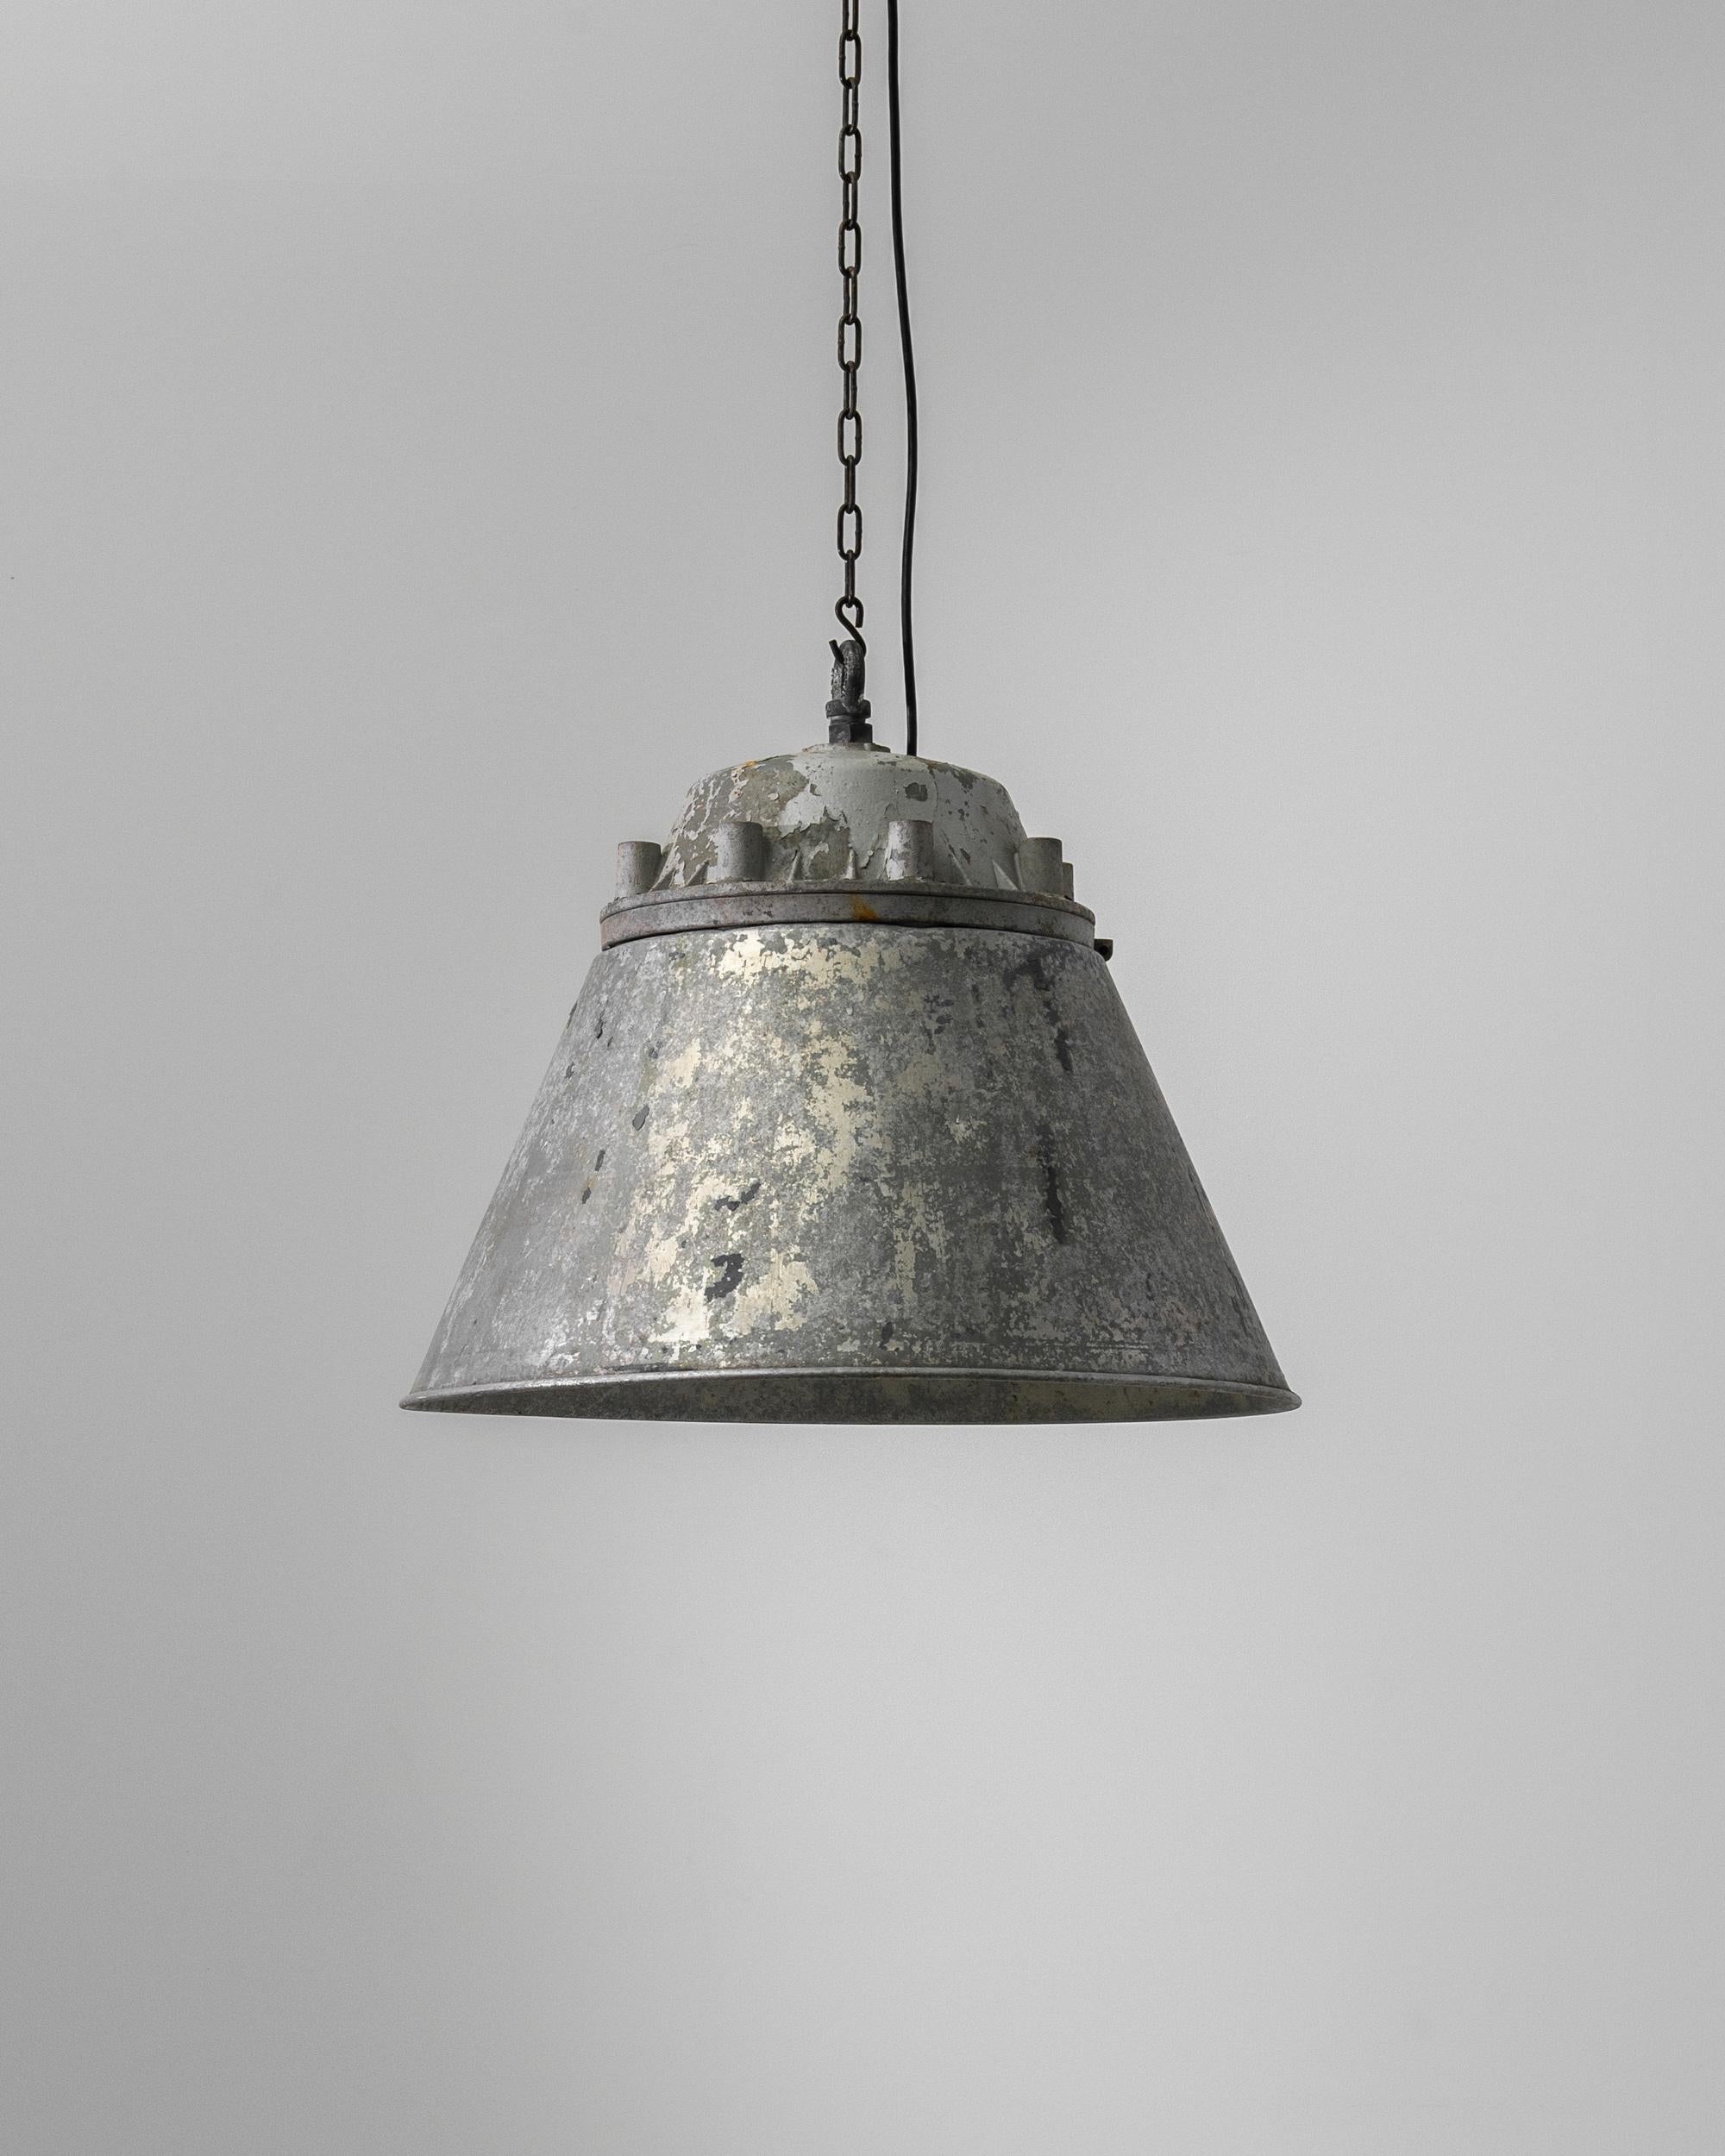 This 20th Century Central European Metal Pendant Lamp is steeped in history and character, offering an industrial aesthetic that is both raw and refined. Its time-weathered surface reveals a life of utility and service, while its sizeable form casts